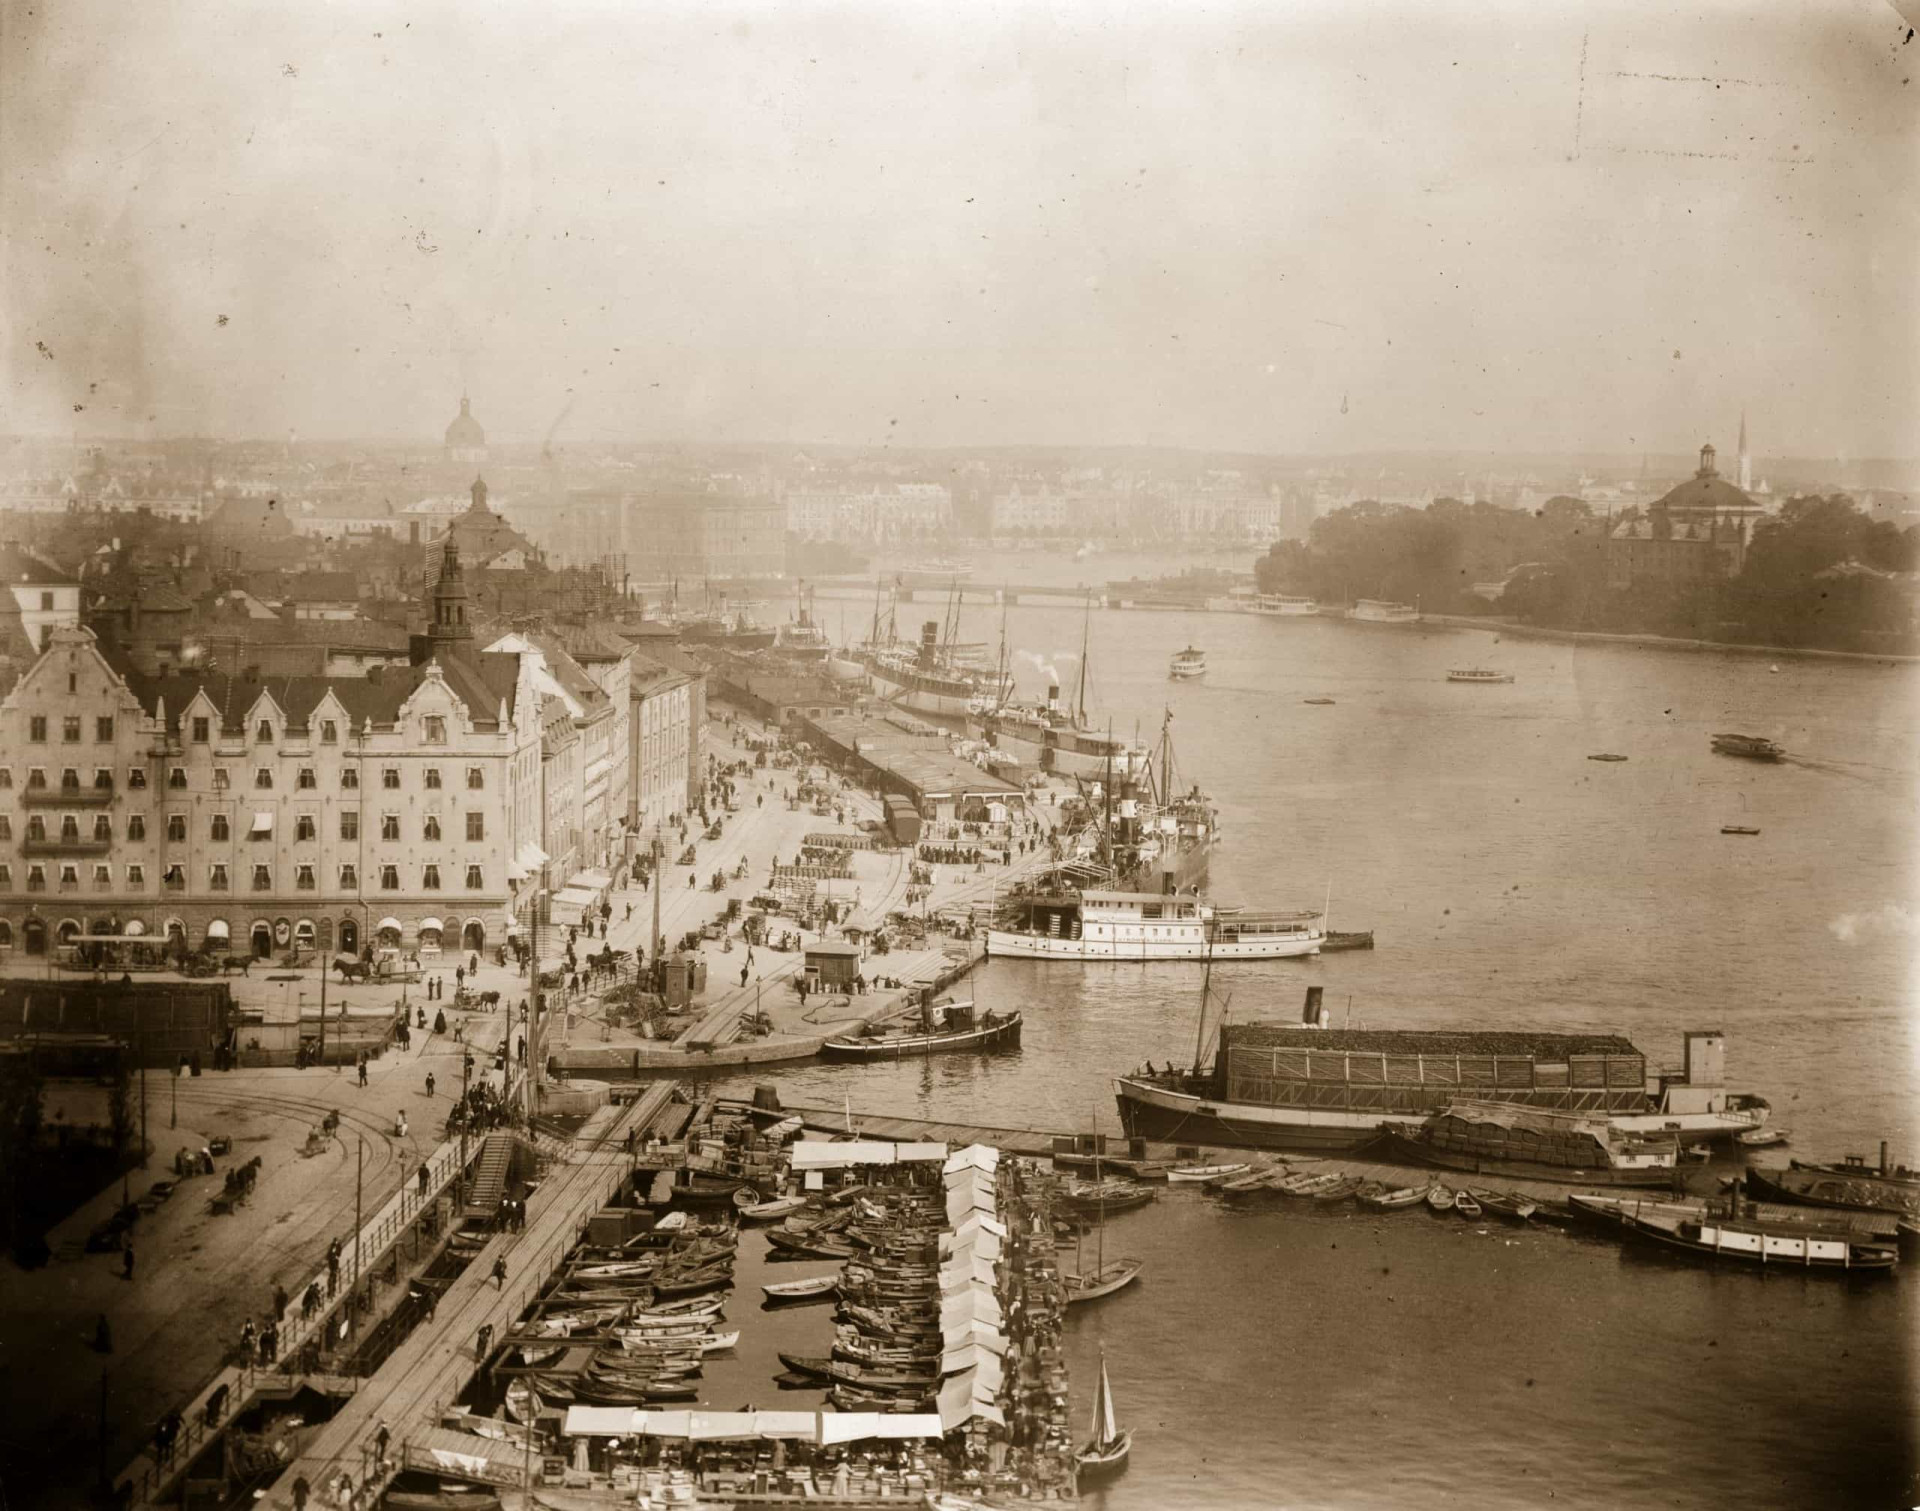 Stockholm's harbor in all its early 20th century glory. The port historically made Stockholm an influential city. Photo taken in 1900.<p><a href="https://www.msn.com/en-us/community/channel/vid-7xx8mnucu55yw63we9va2gwr7uihbxwc68fxqp25x6tg4ftibpra?cvid=94631541bc0f4f89bfd59158d696ad7e">Follow us and access great exclusive content every day</a></p>